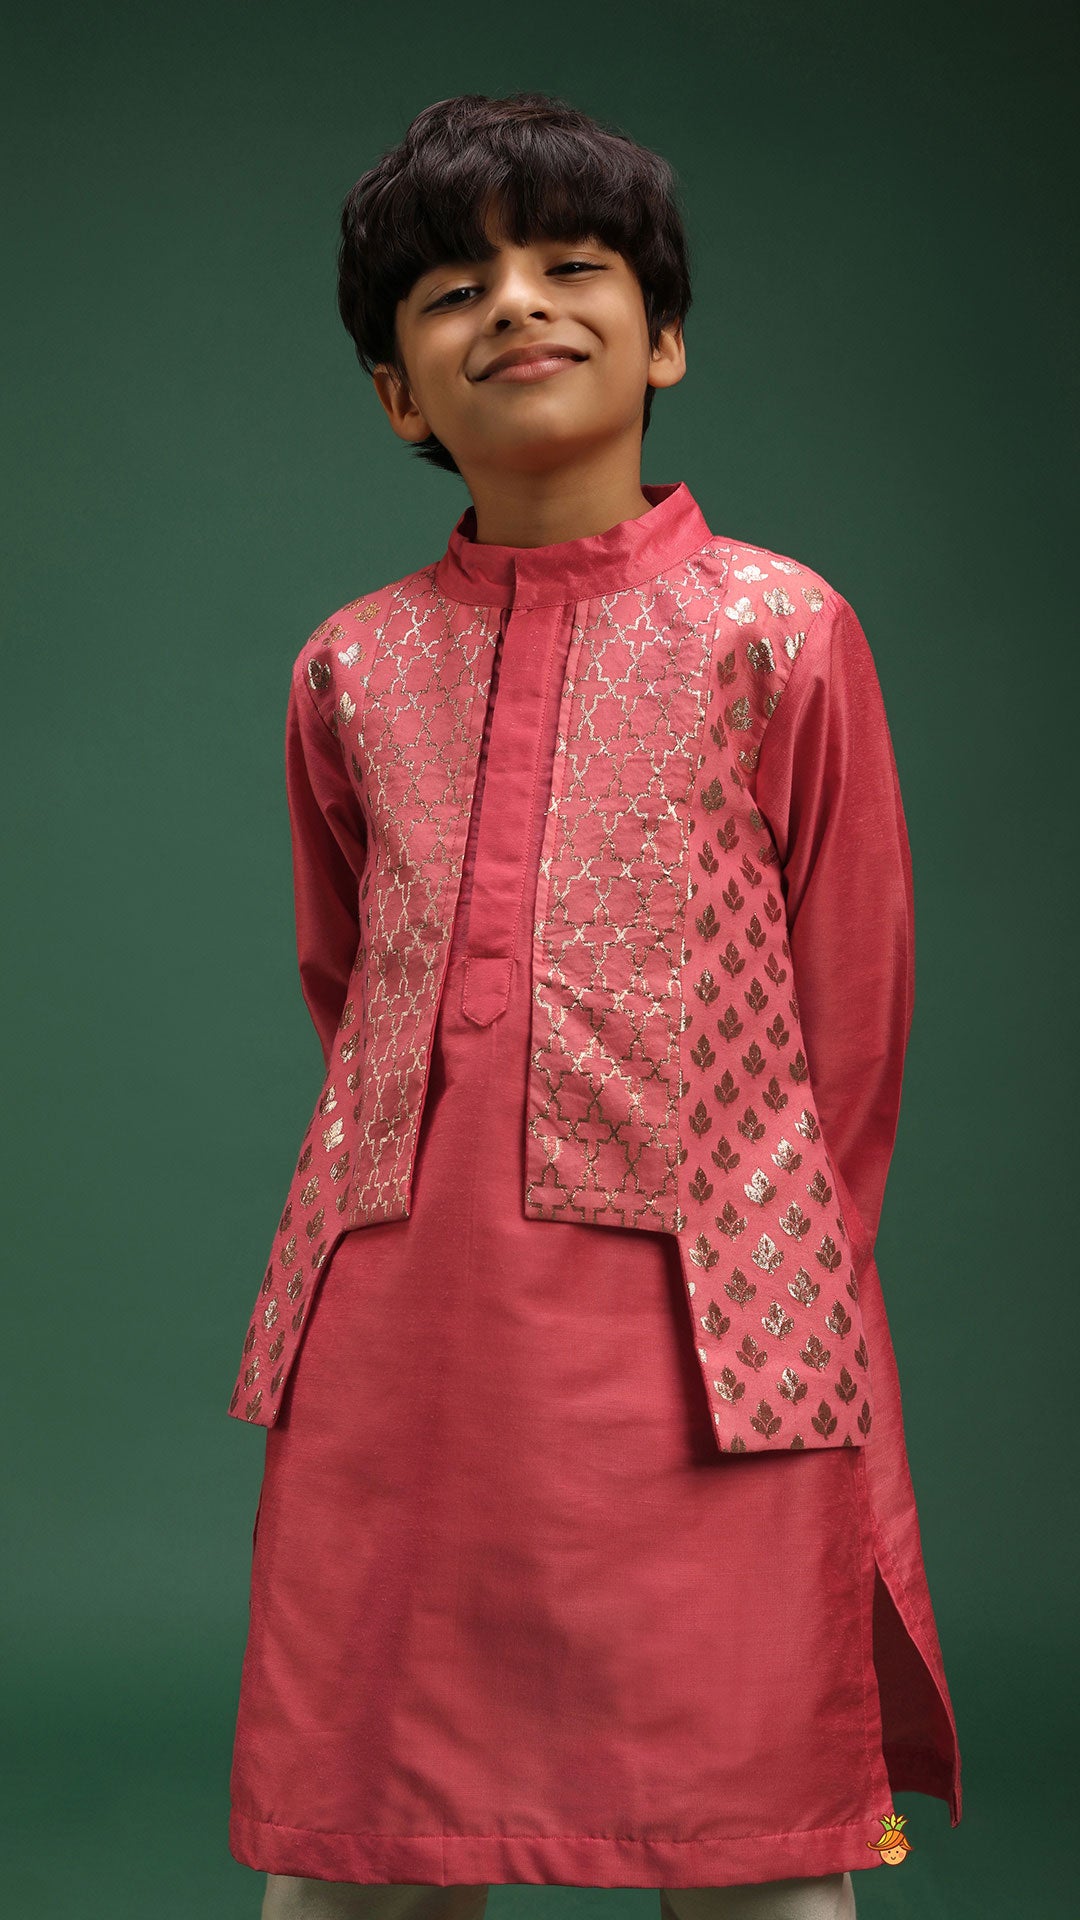 Pre Order: Coral Pink Kurta With Attached Asymmetric Jacket And Pyjama